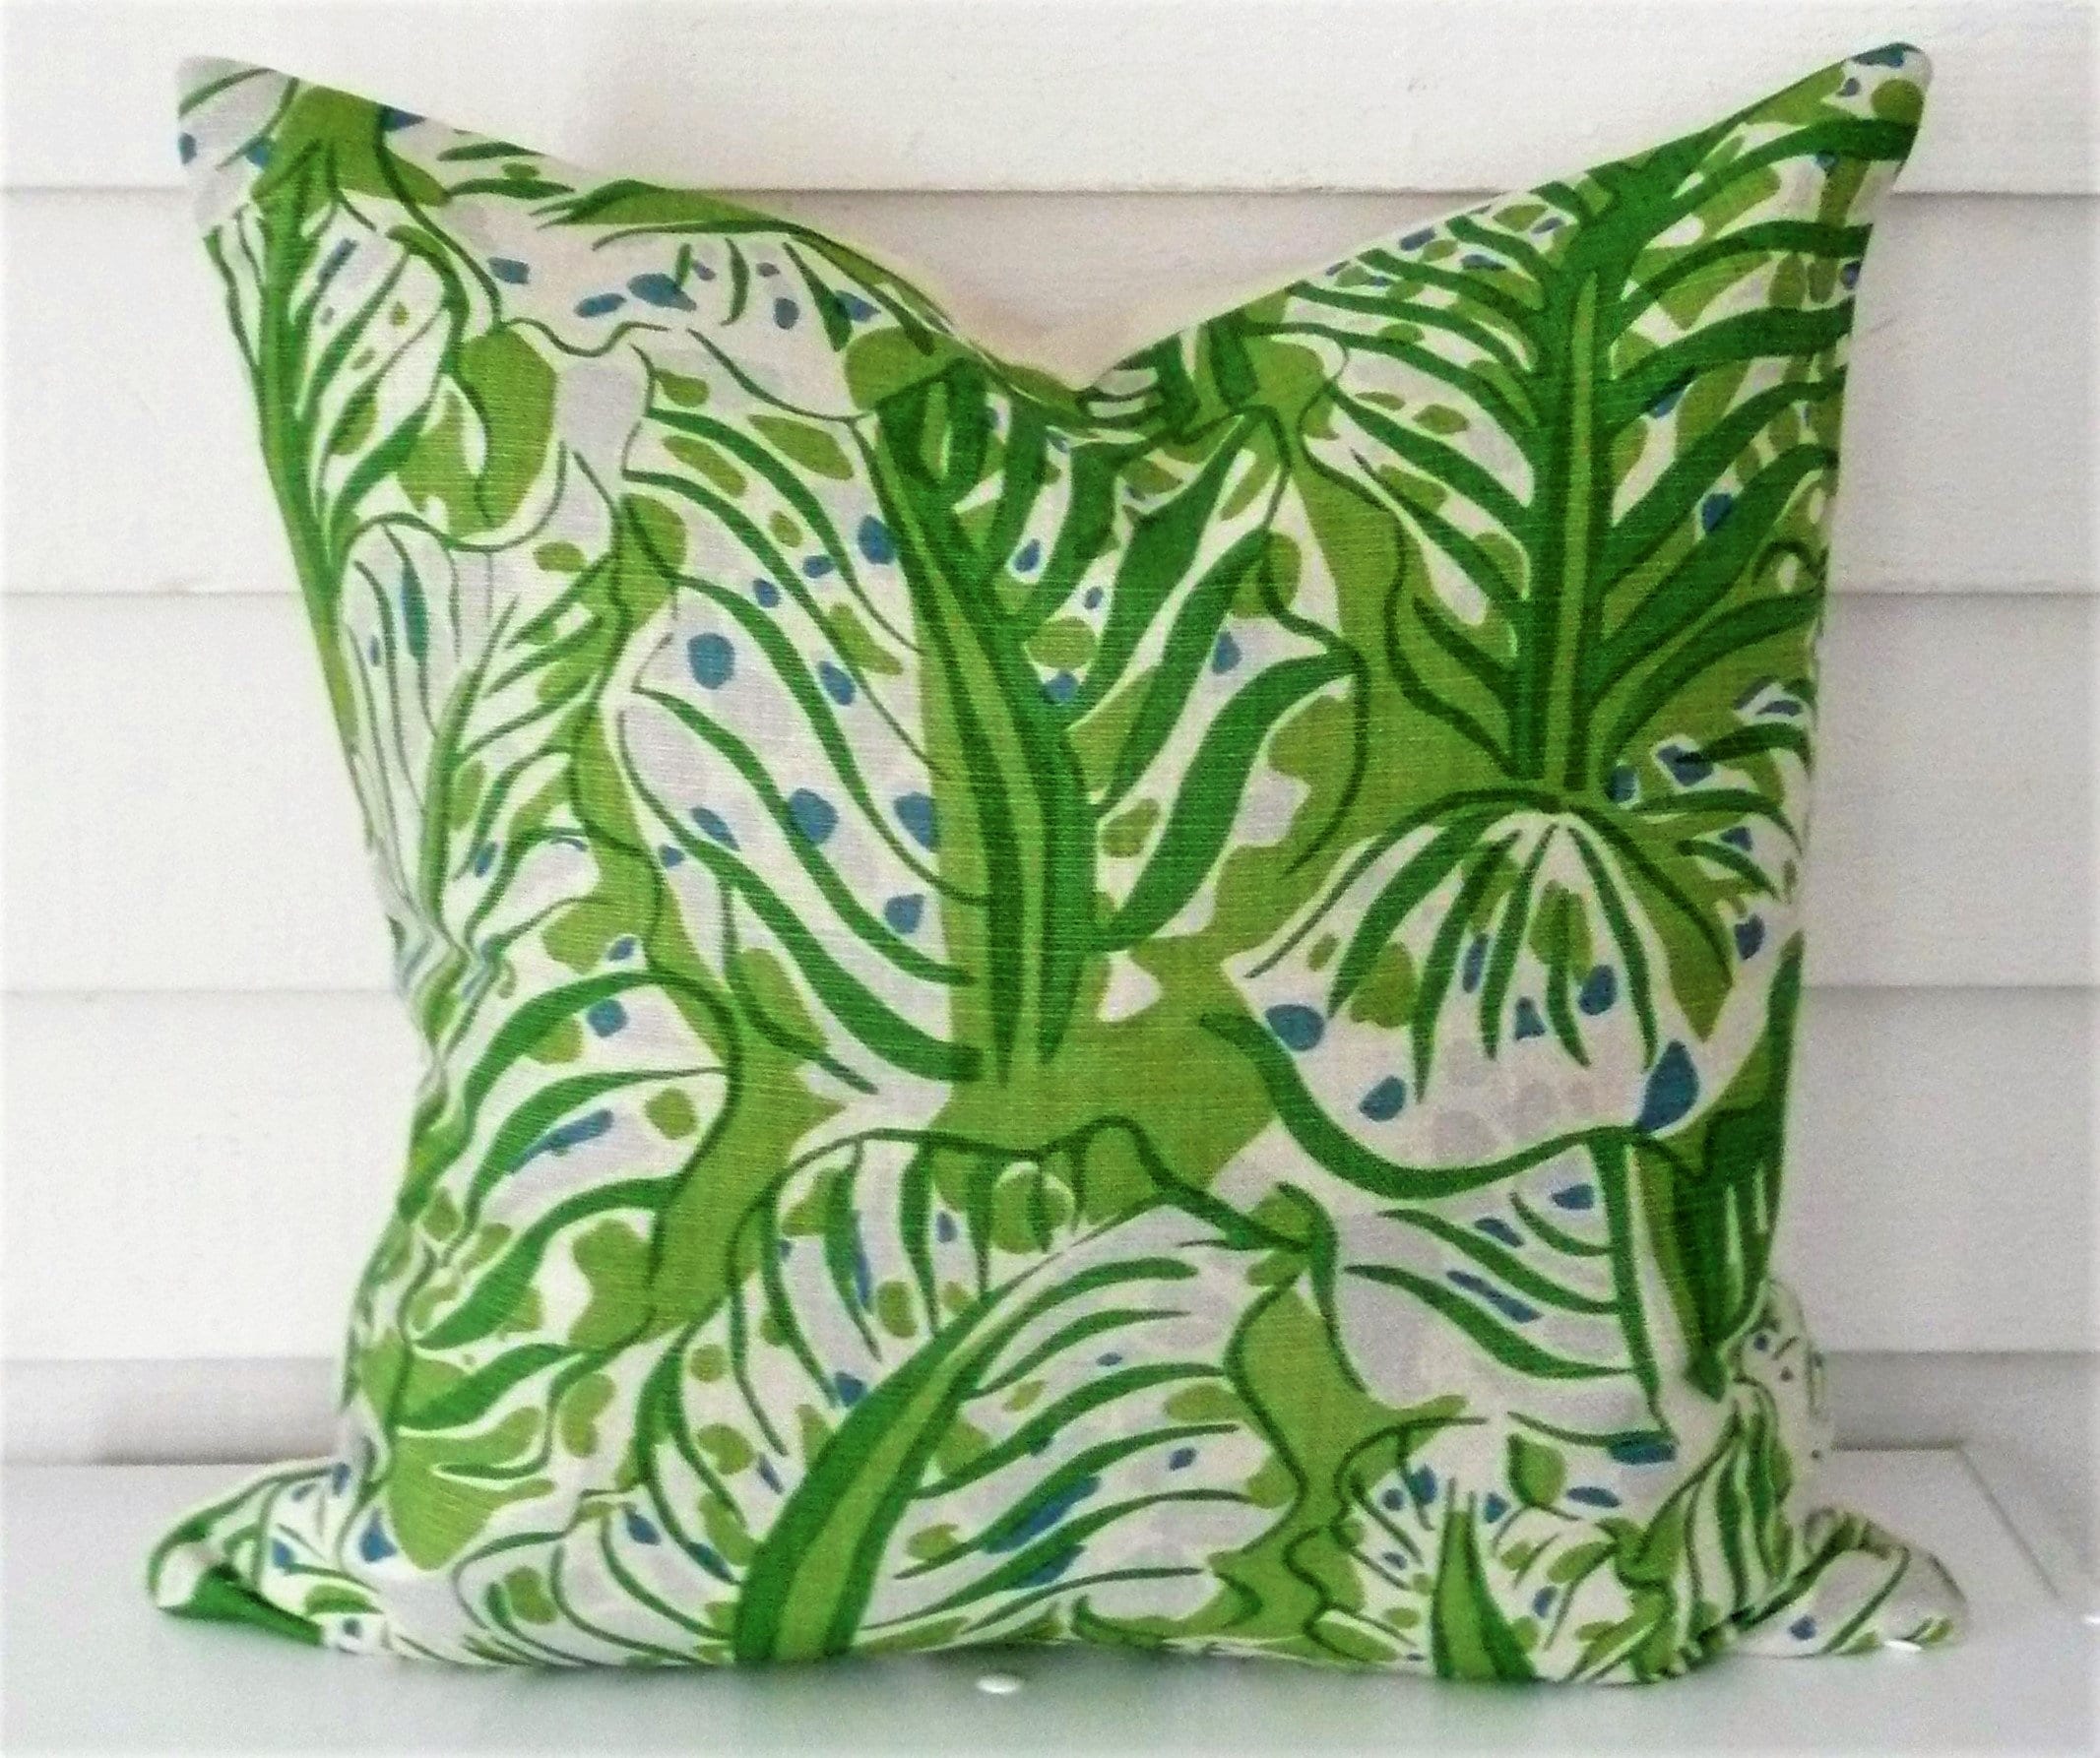 Green Primitive Print Throw Pillow Covers, 18x18